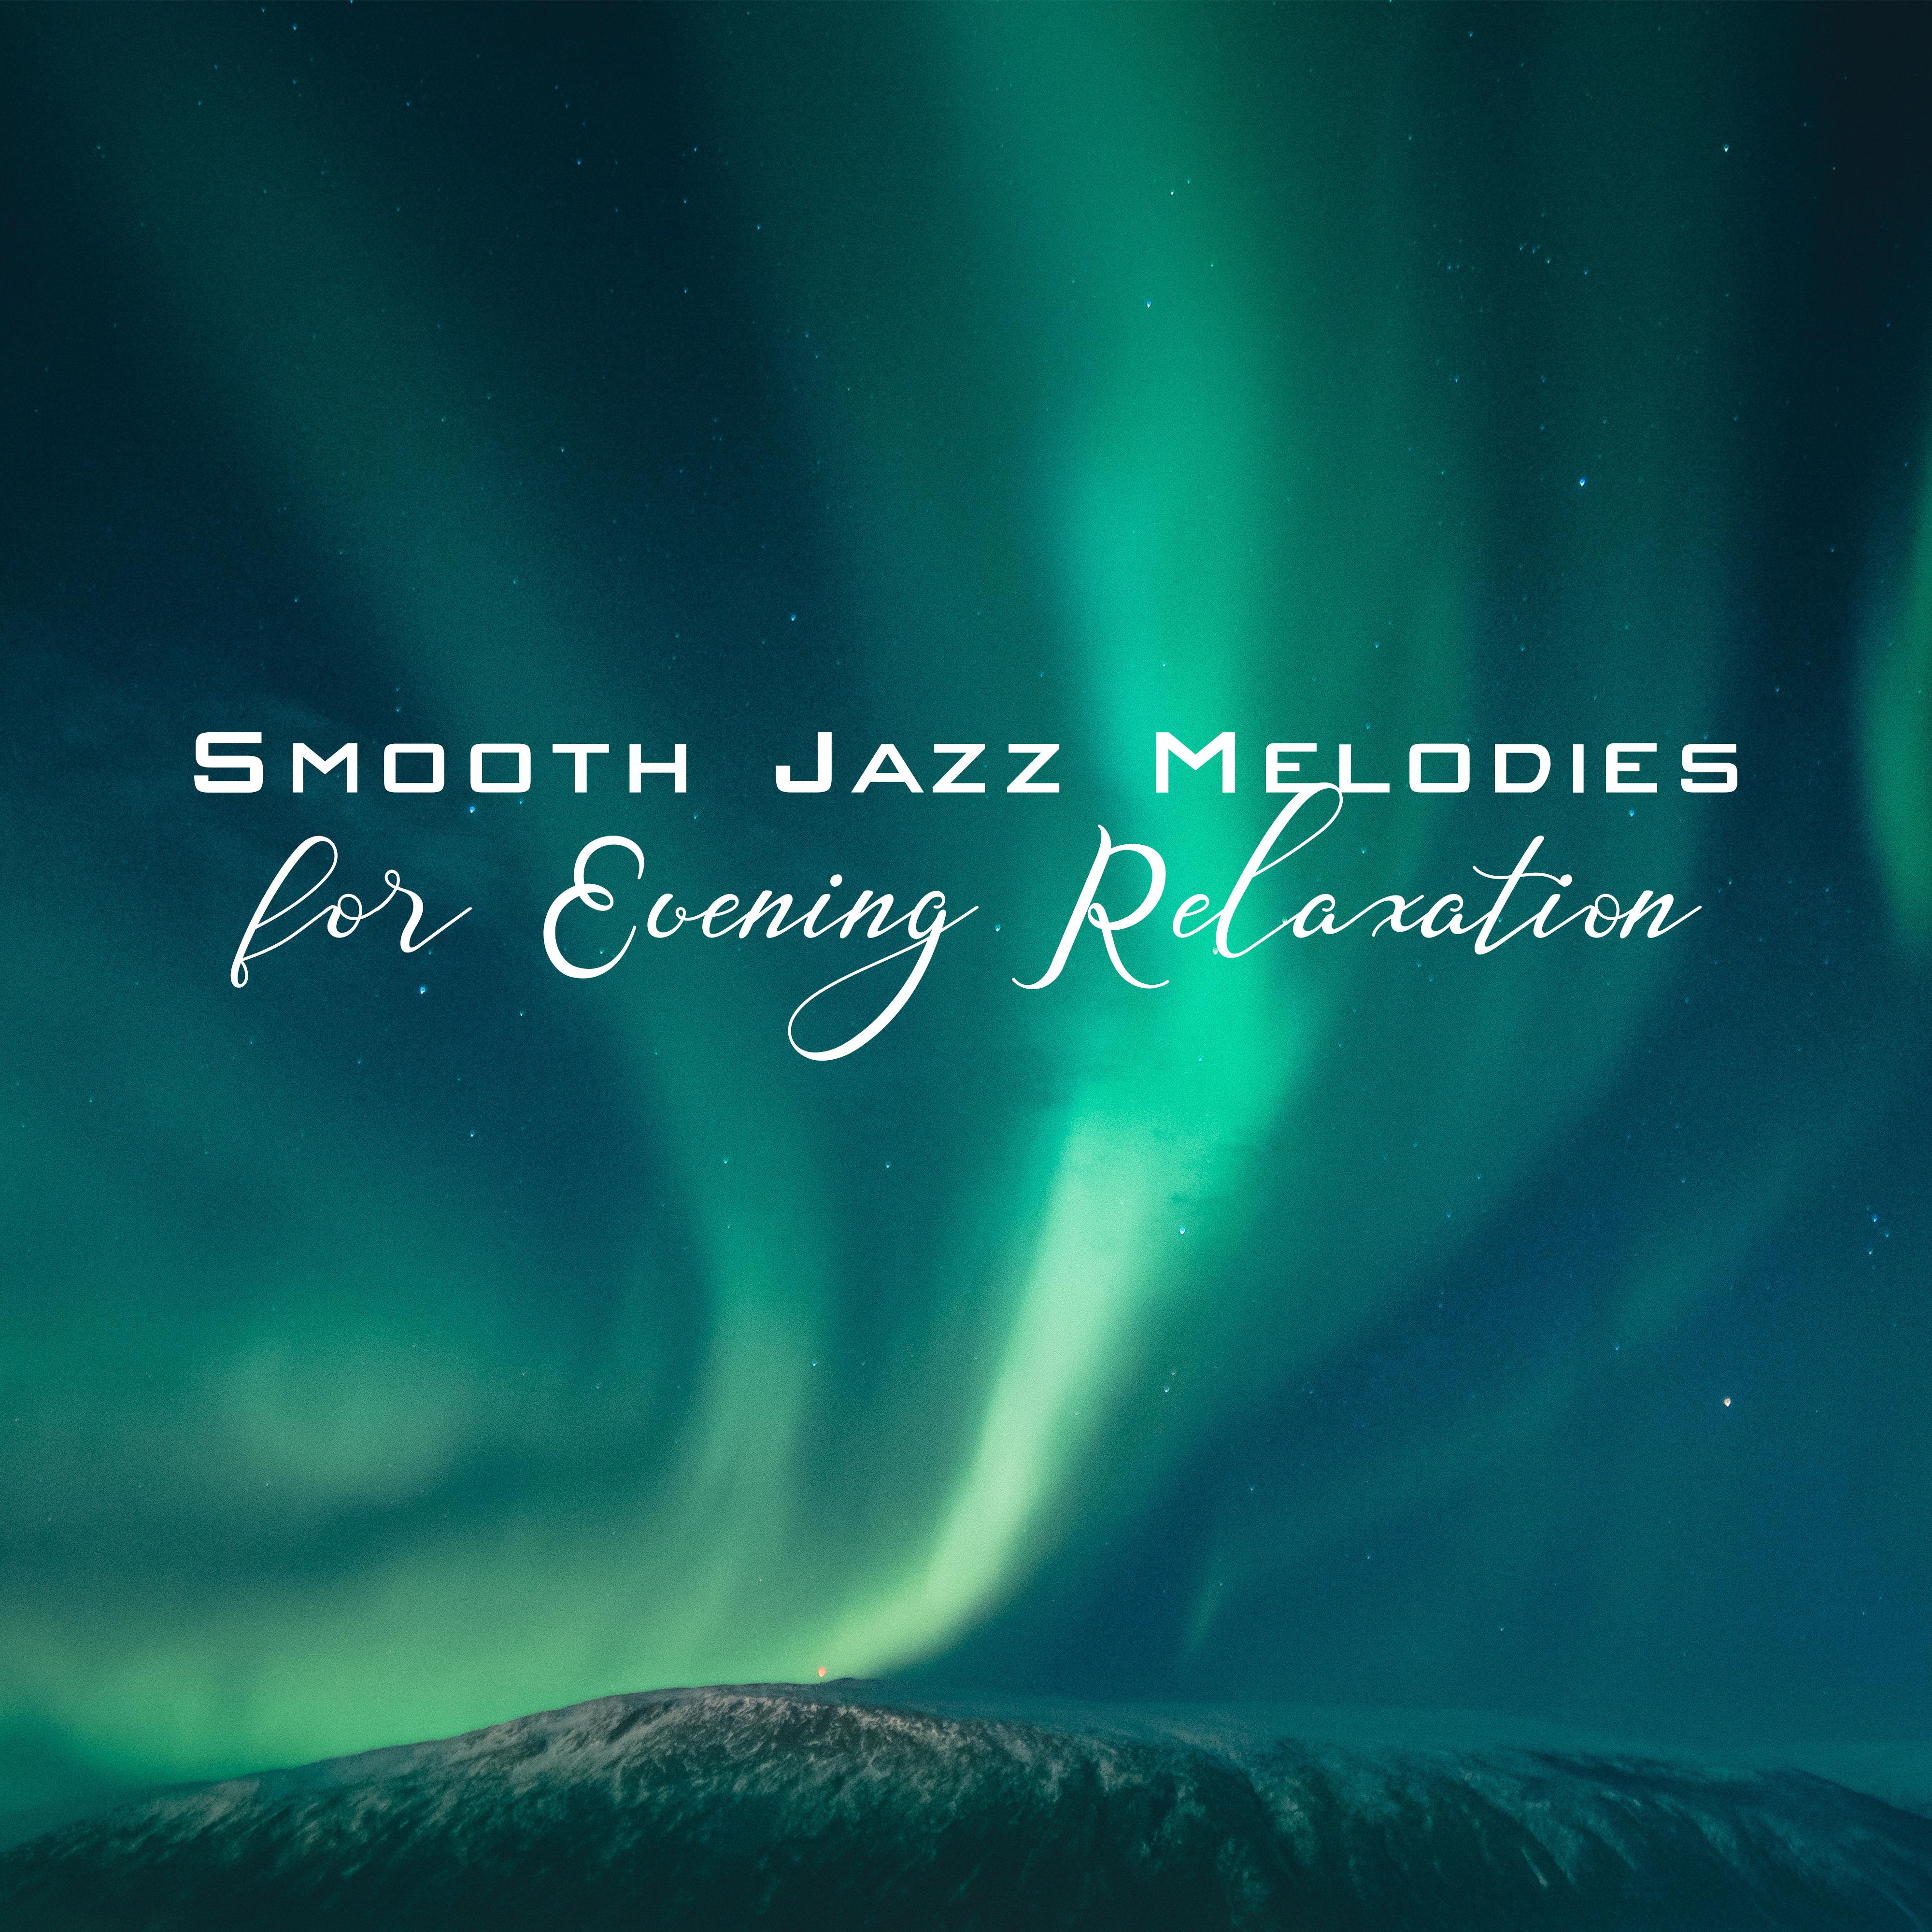 Smooth Jazz Melodies for Evening Relaxation